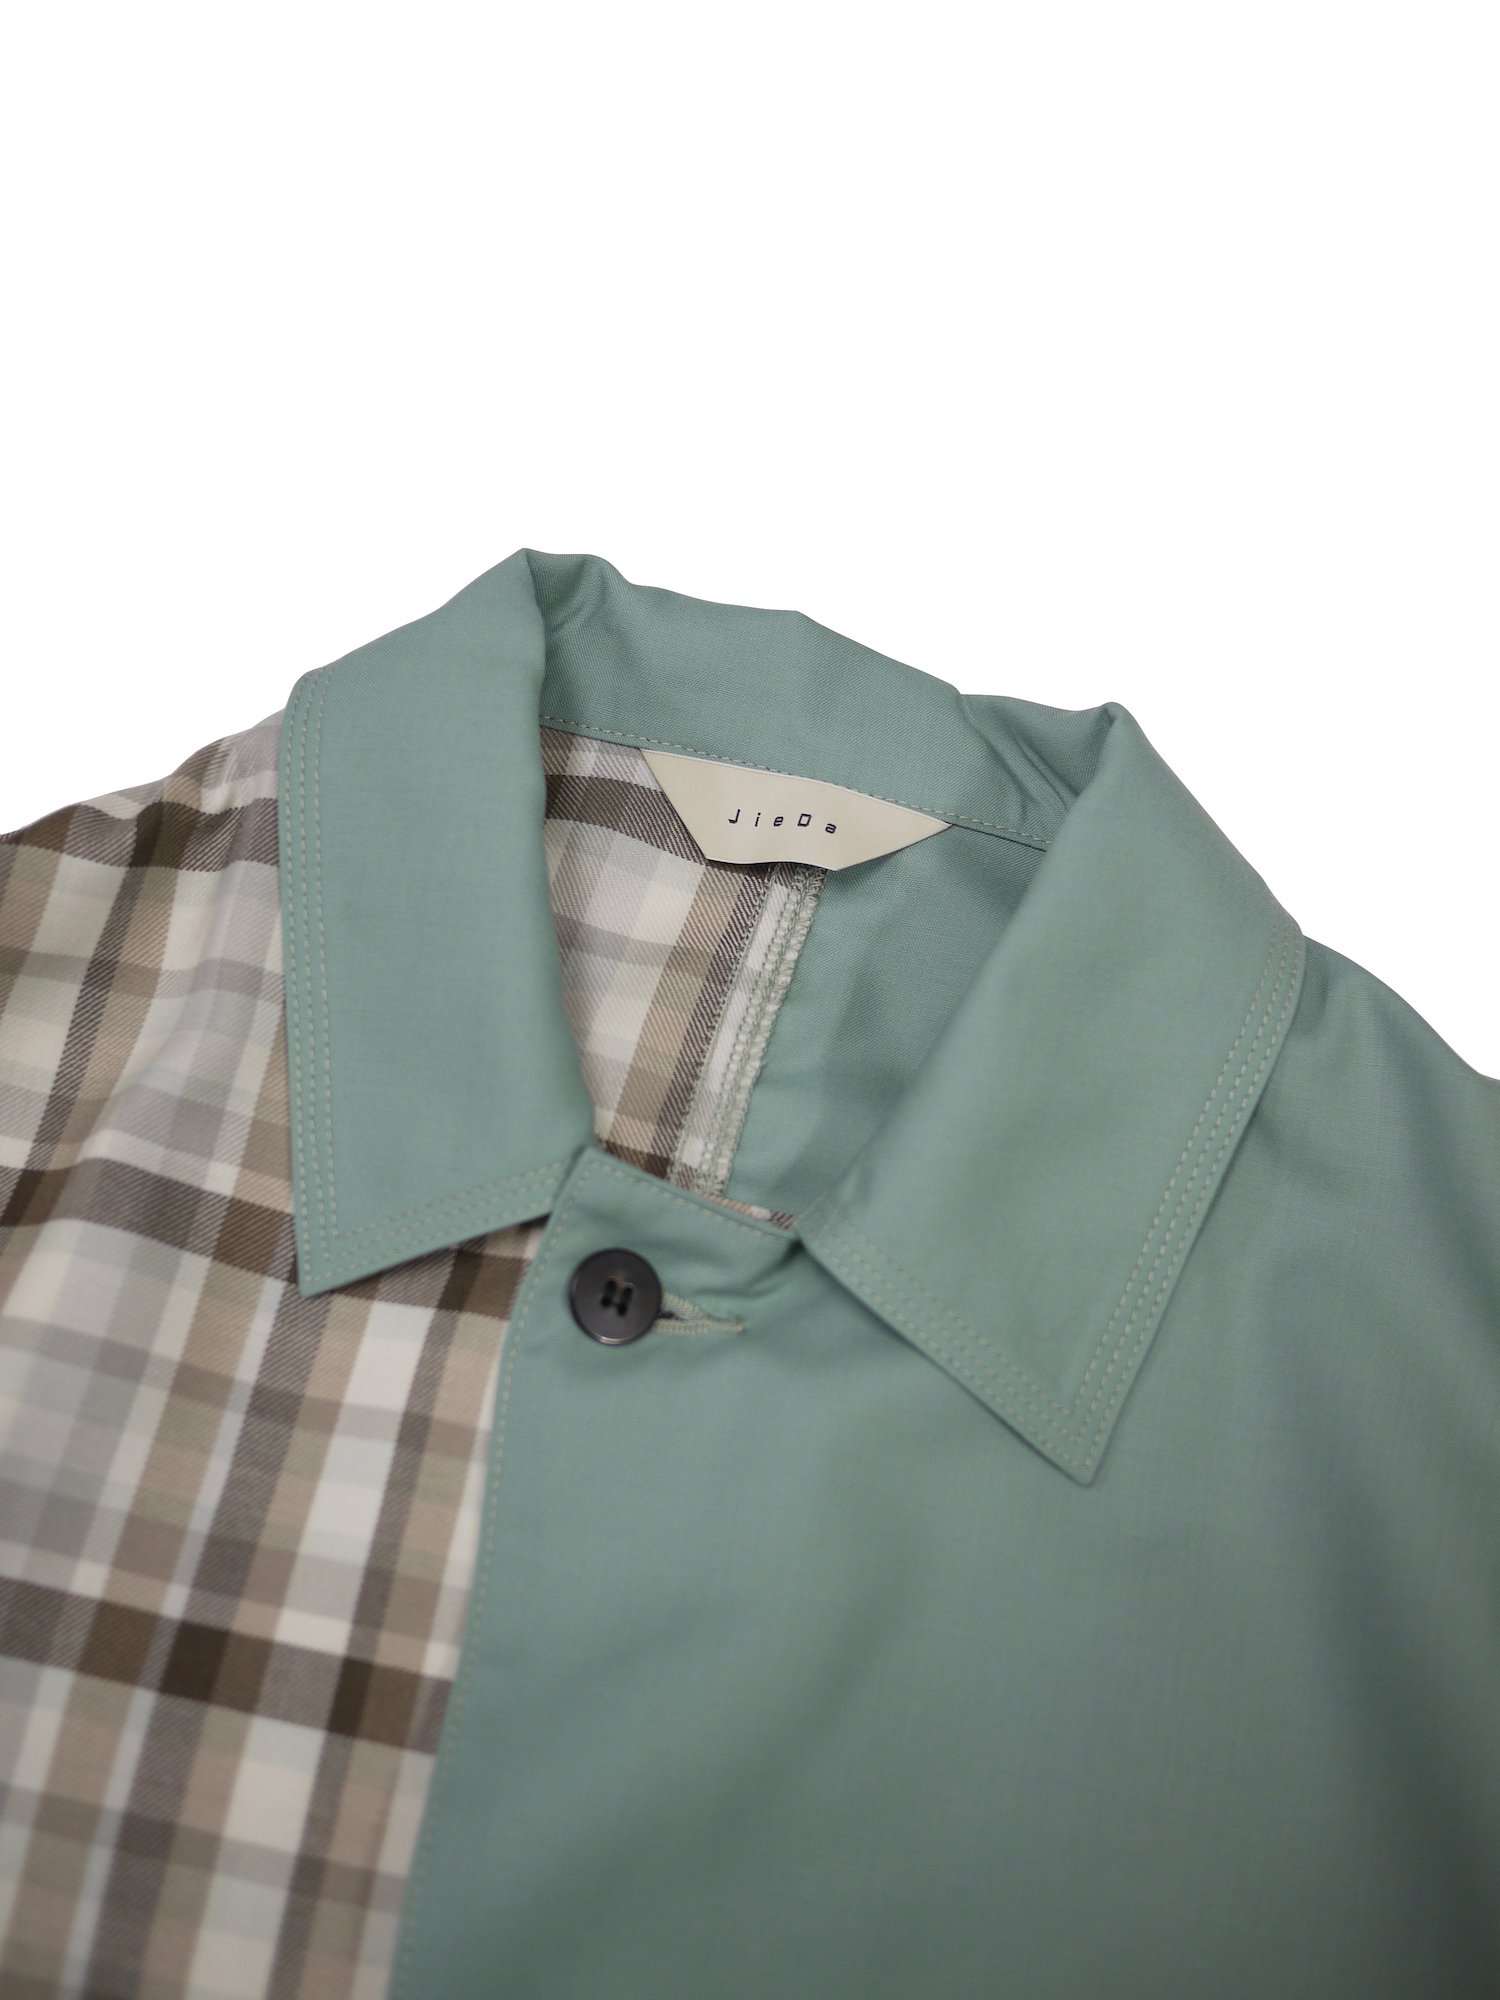 JieDa<br />SUMMER 2TONE JACKET / MINT<img class='new_mark_img2' src='https://img.shop-pro.jp/img/new/icons14.gif' style='border:none;display:inline;margin:0px;padding:0px;width:auto;' />